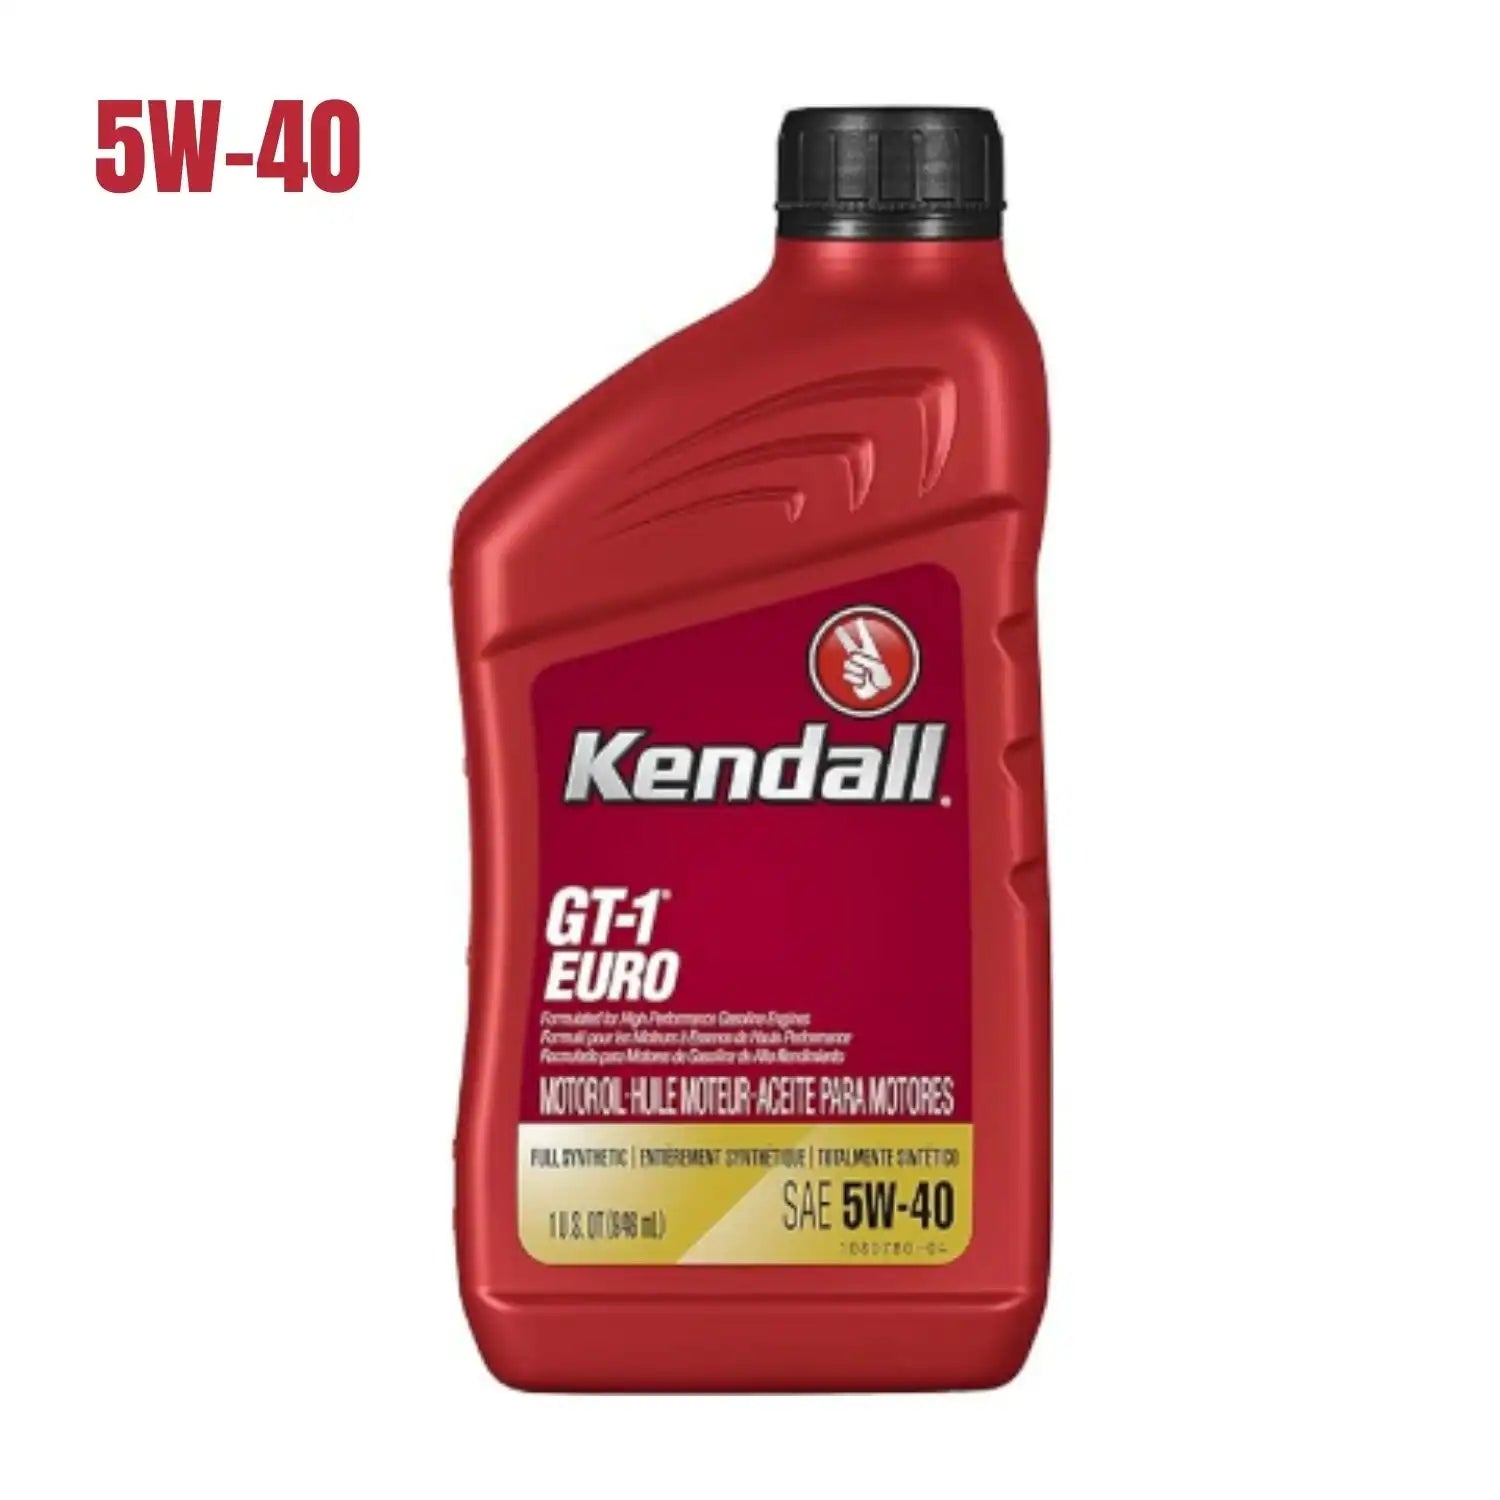 Kendall 5w-40 Full-Synthetic Car Engine Oil 1 Liter